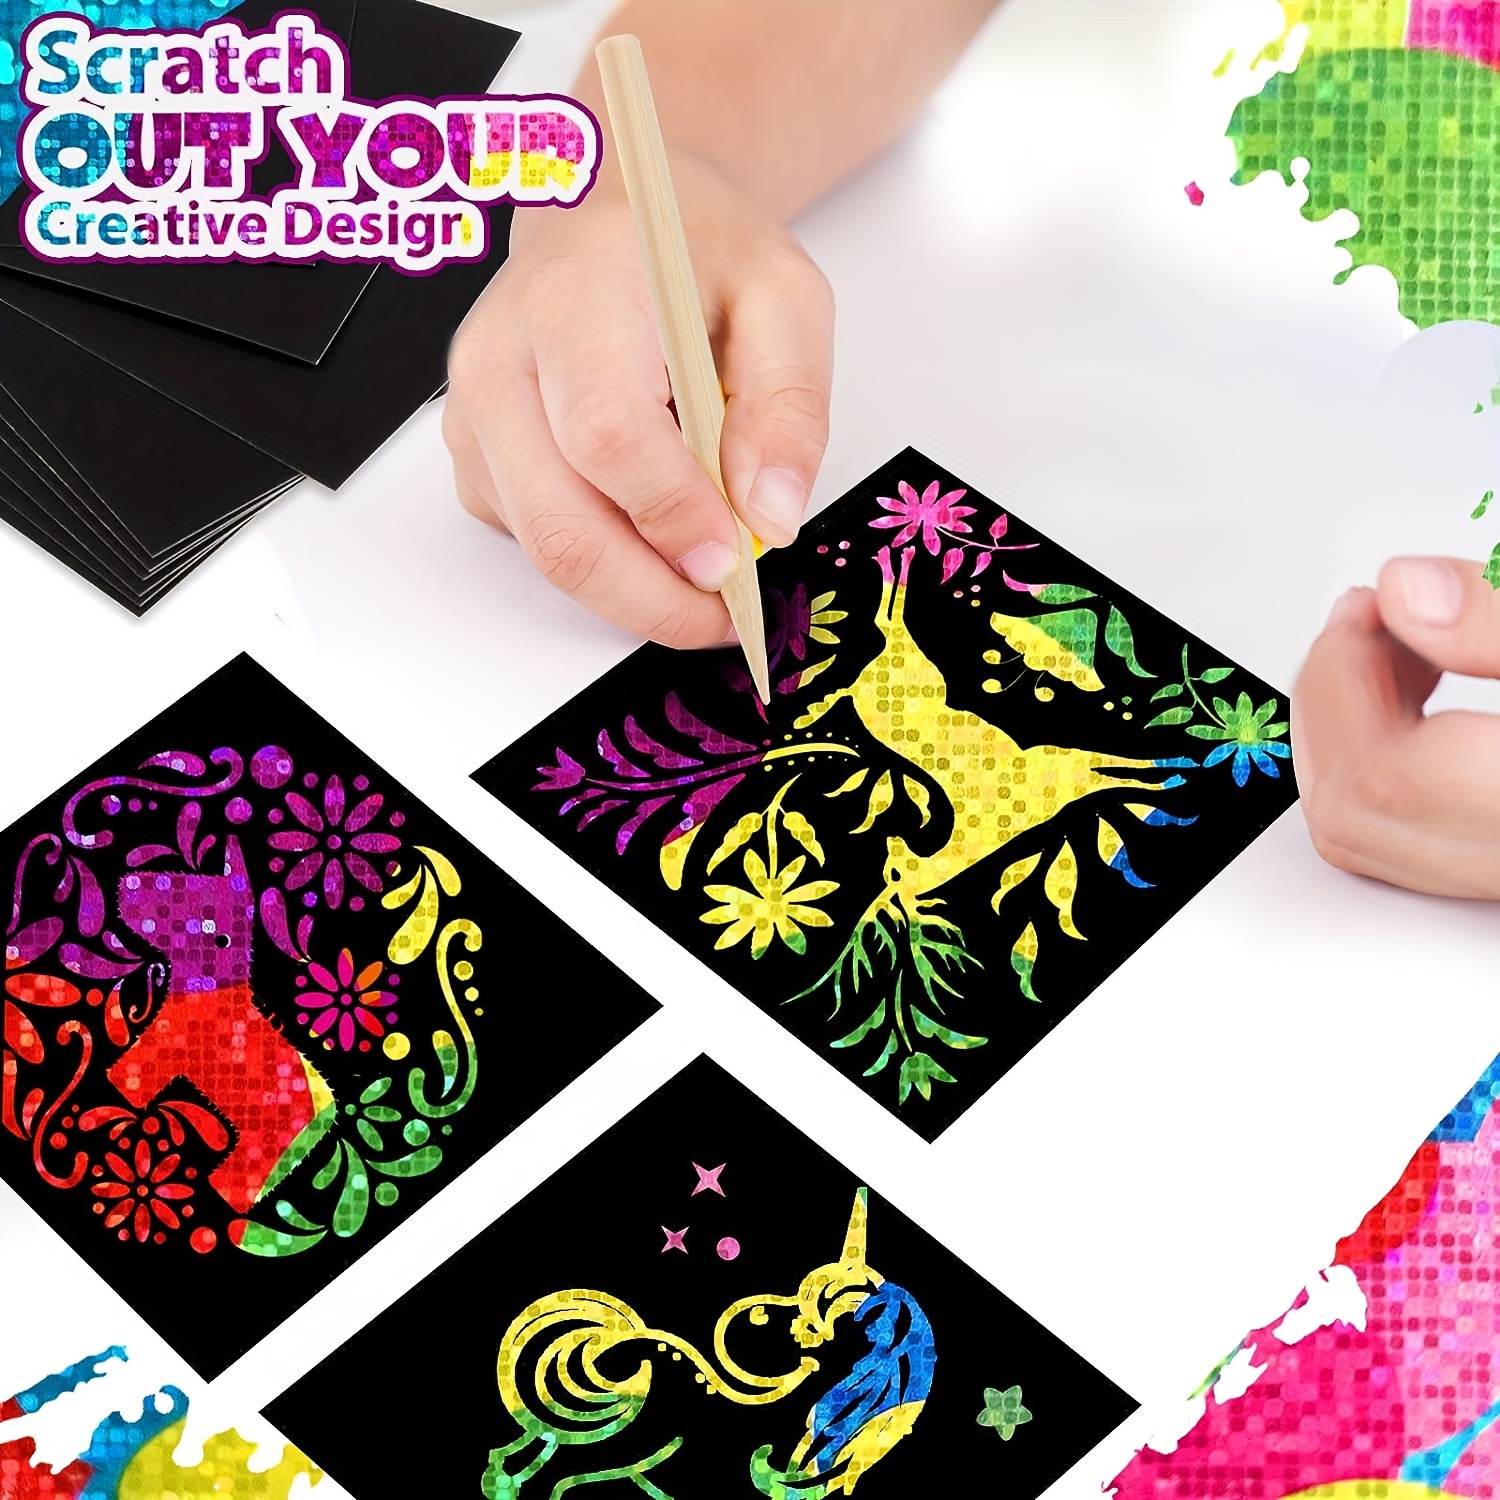  ZMLM Scratch Paper Art-Craft Gifts Christmas for Kids - Rainbow  Scratch Off Art Set Activity Coloring Craft Drawing Pad Black Magic Art  Craft Supplies Kits for Girls Boys Birthday Present Party